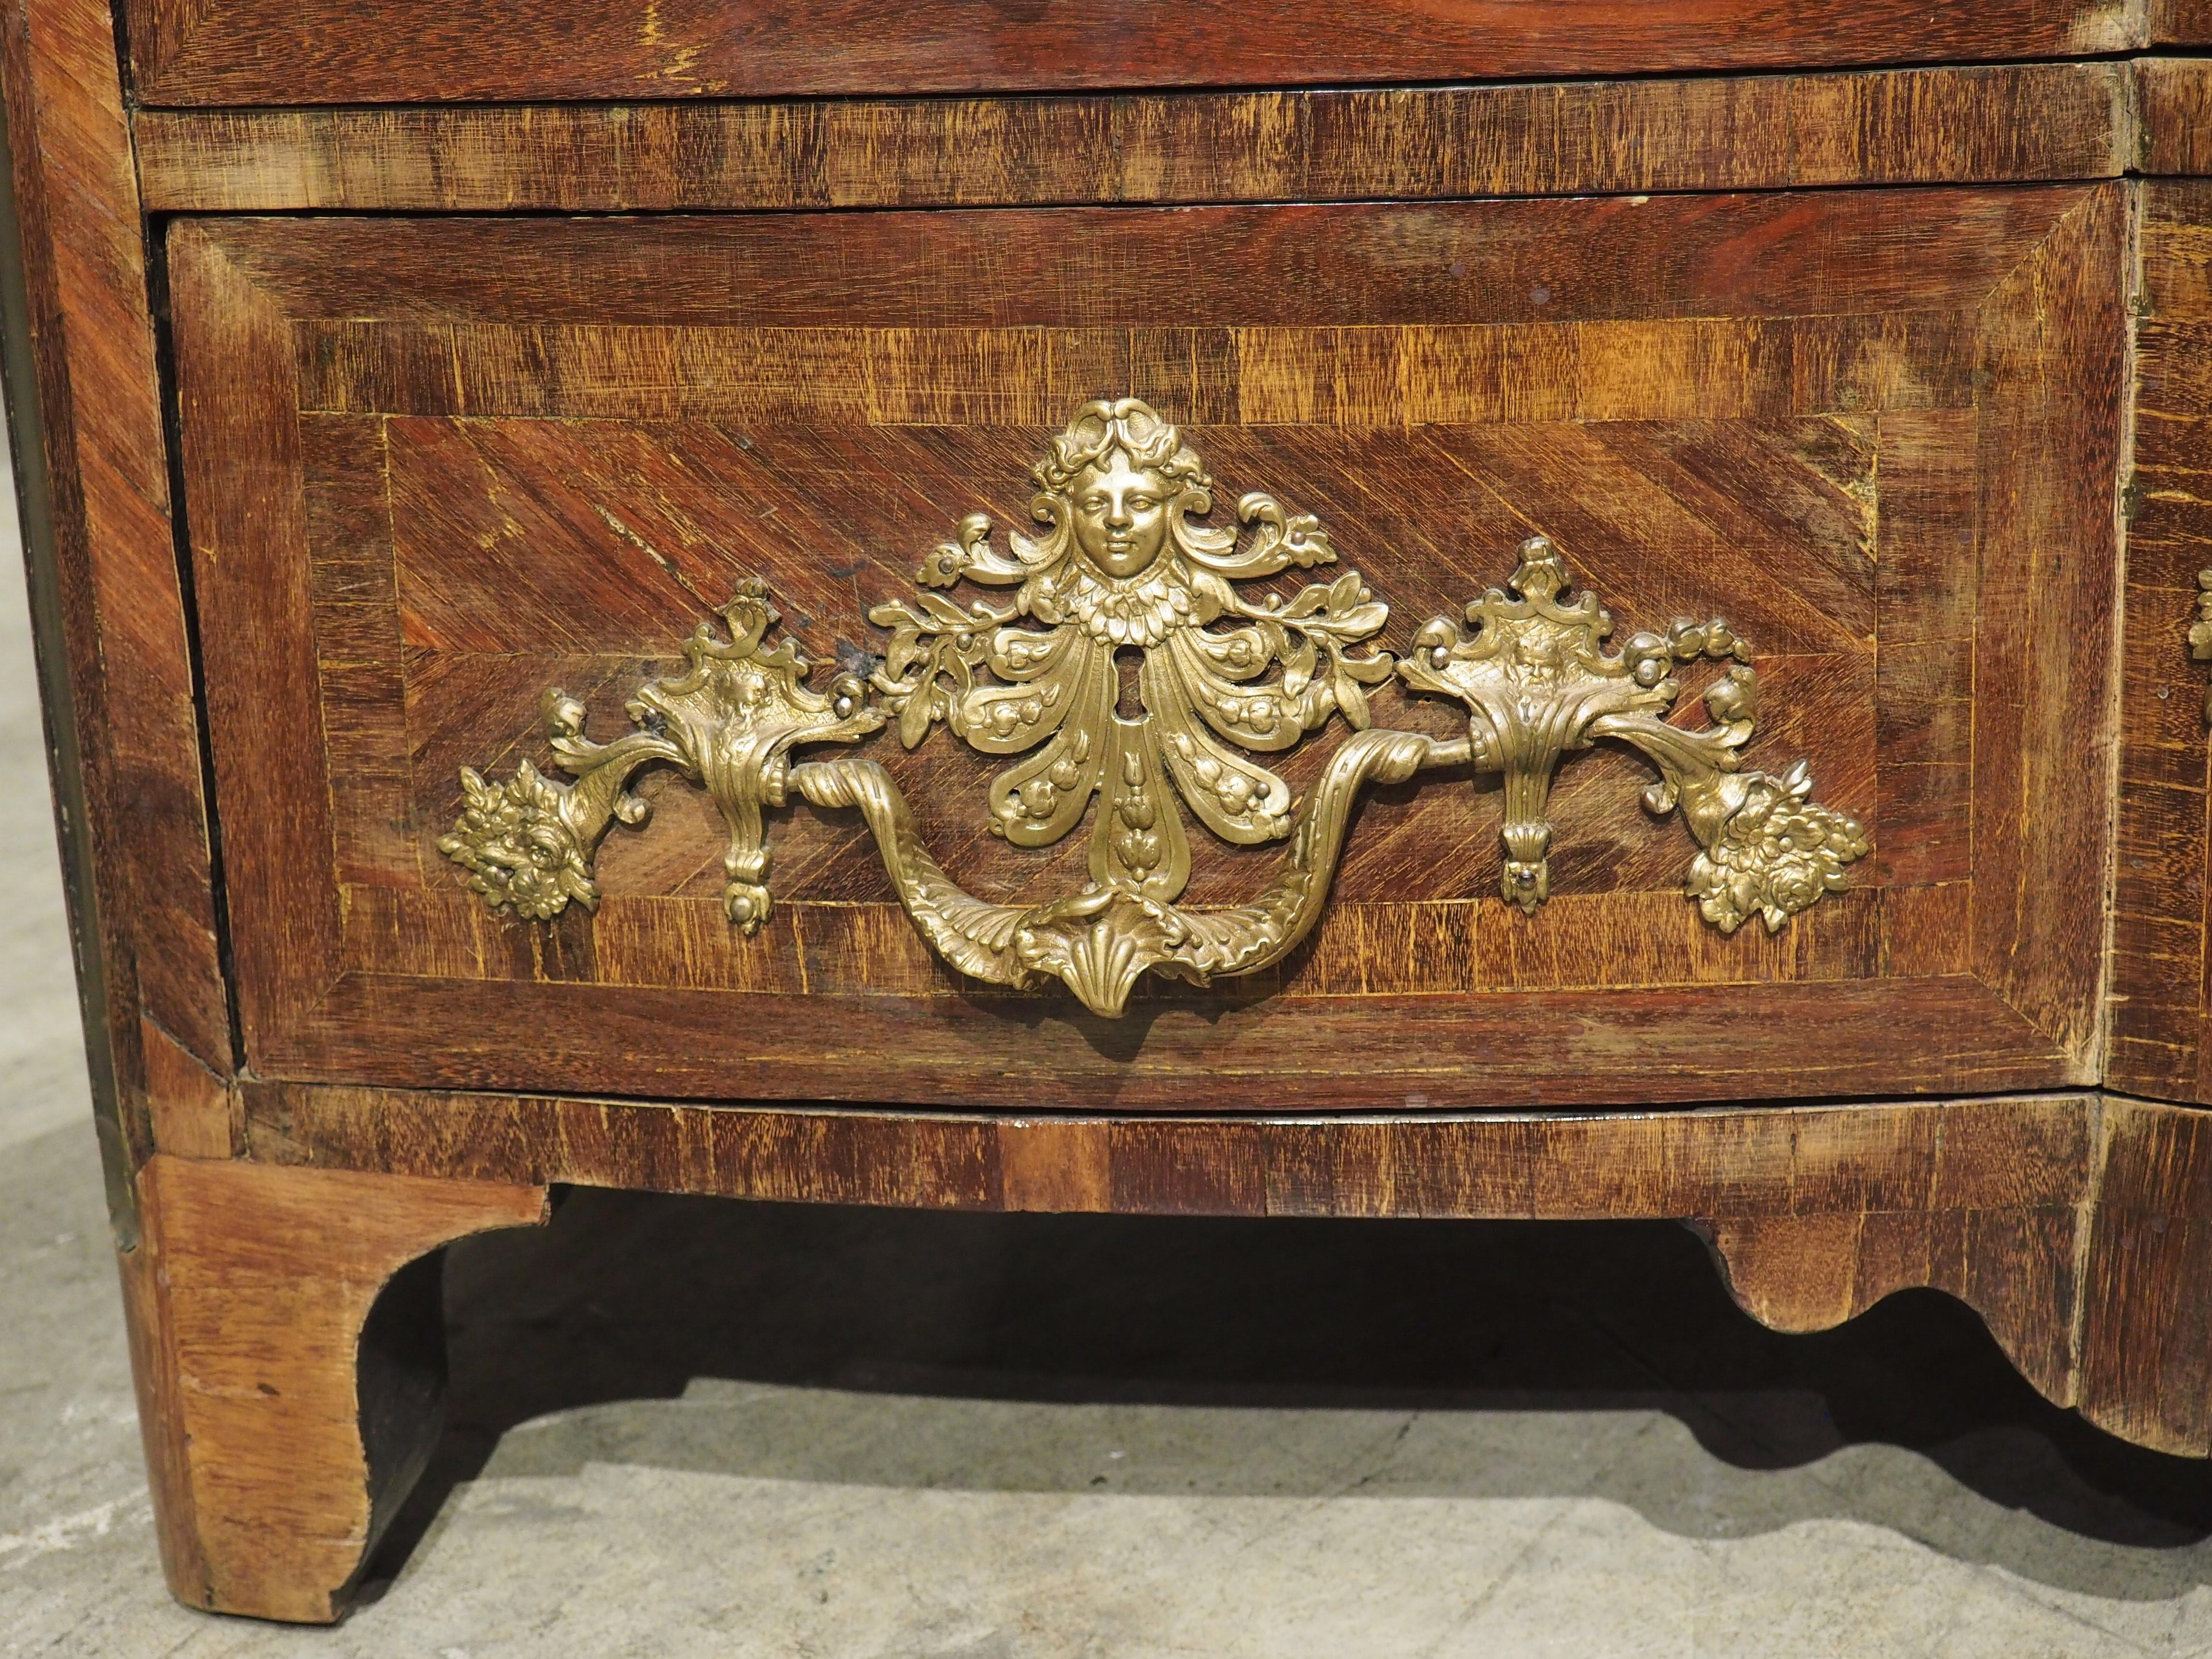 Early 18th Century Period French Louis XIV Commode with Rich Bronze Ornamentation, circa 1705